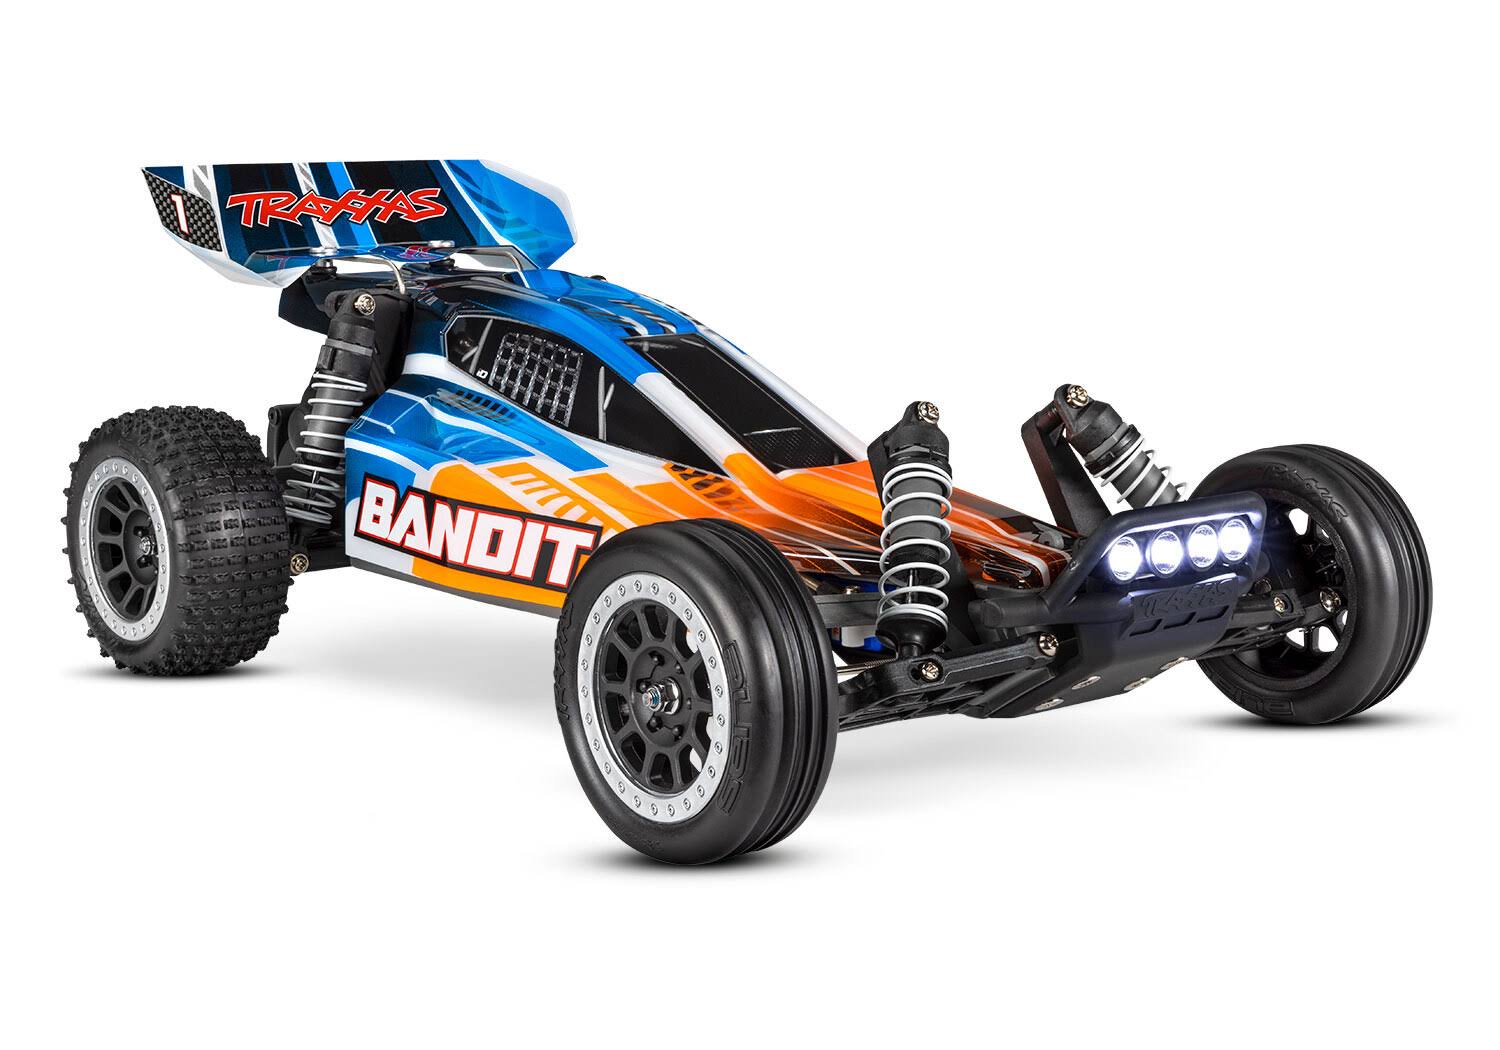 Traxxas Bandit 1/10 XL-5 2WD RC Buggy with LED Lighting Orange 24054-61 - Default Title